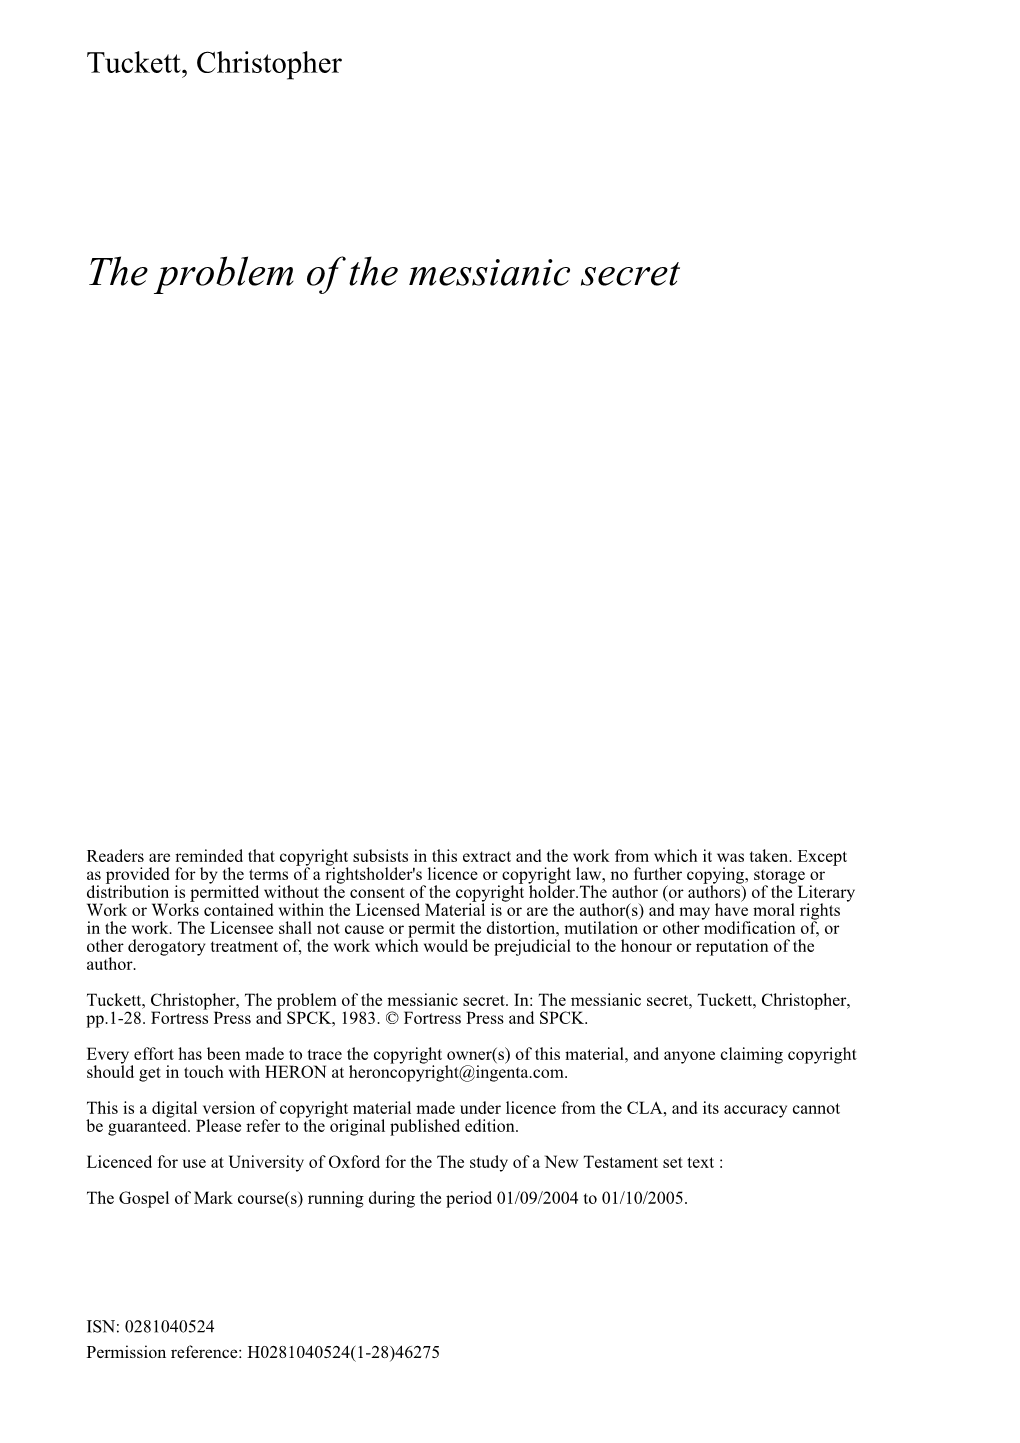 The Problem of the Messianic Secret